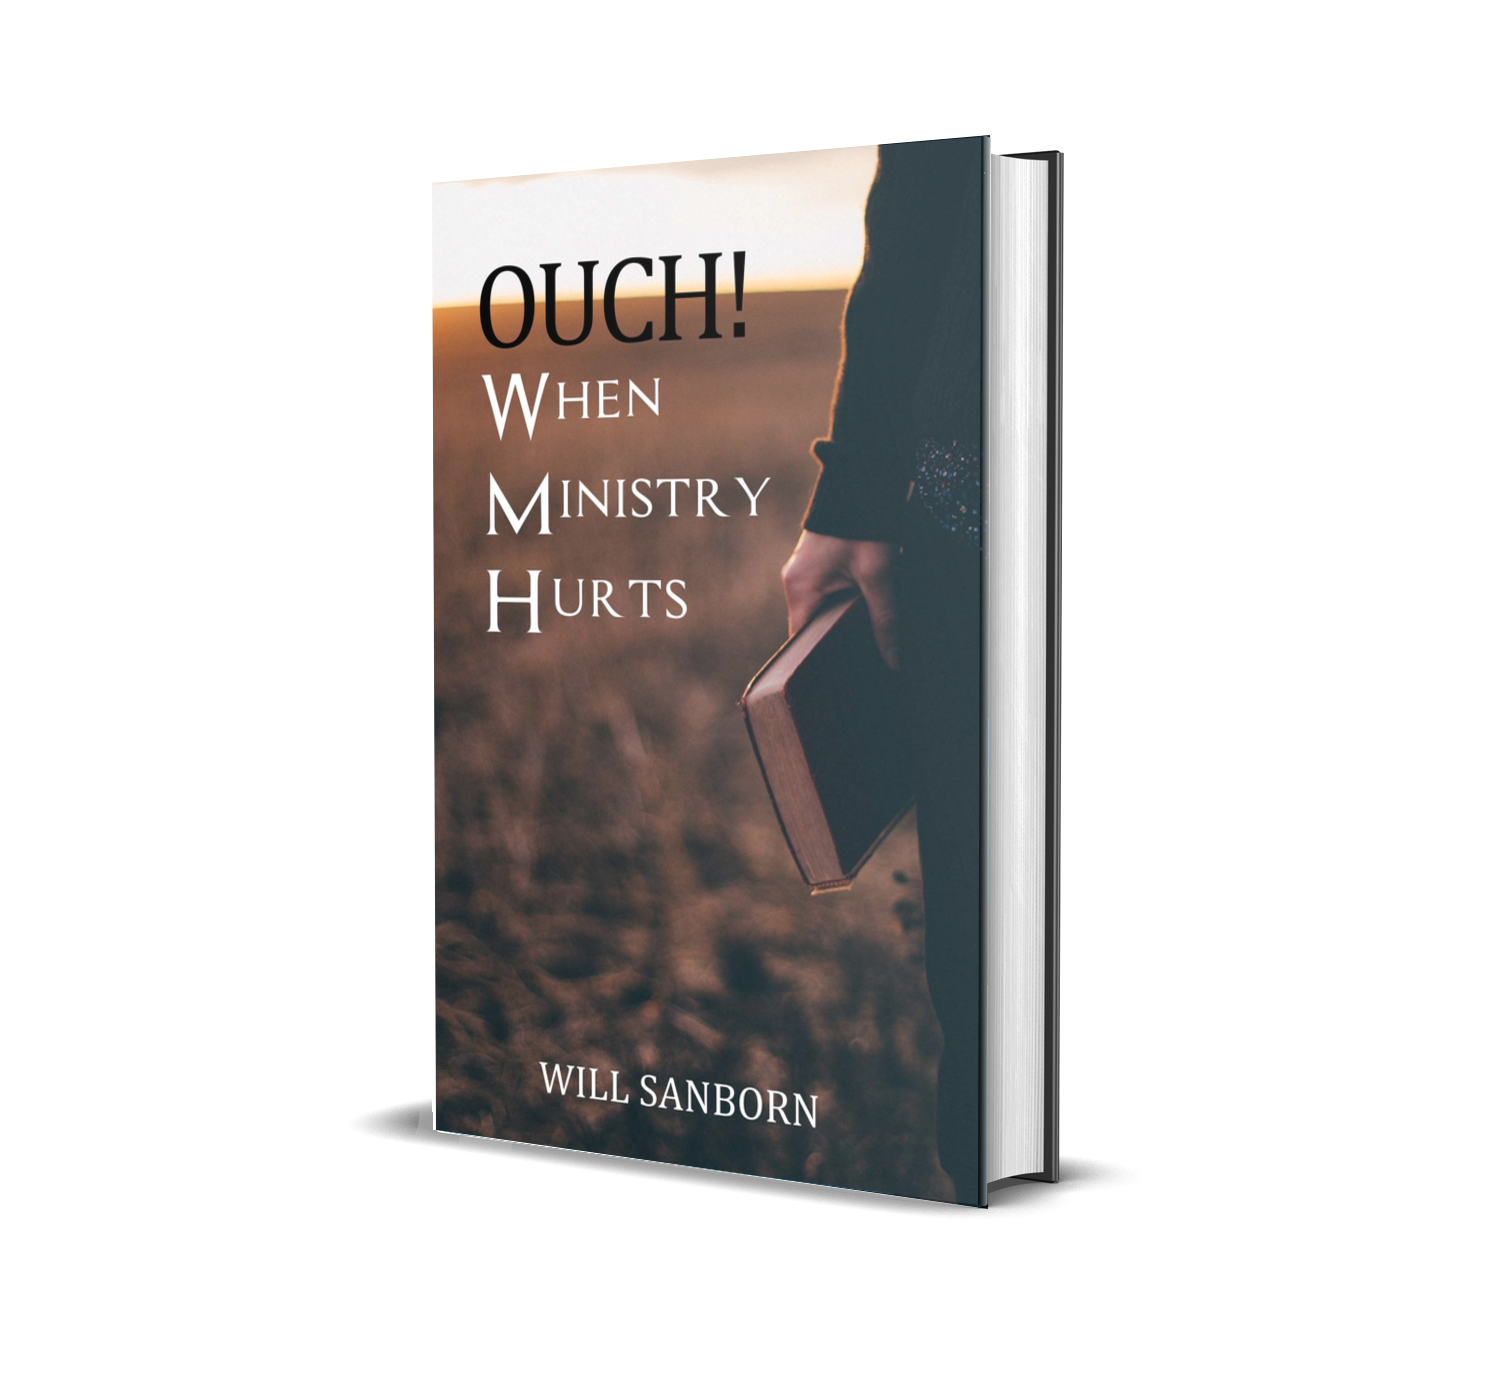 Serving in the ministry comes with great sacrifices, join William Sanborn as he shares his ministry walk story in his new book "Ouch! When Ministry Hurts"